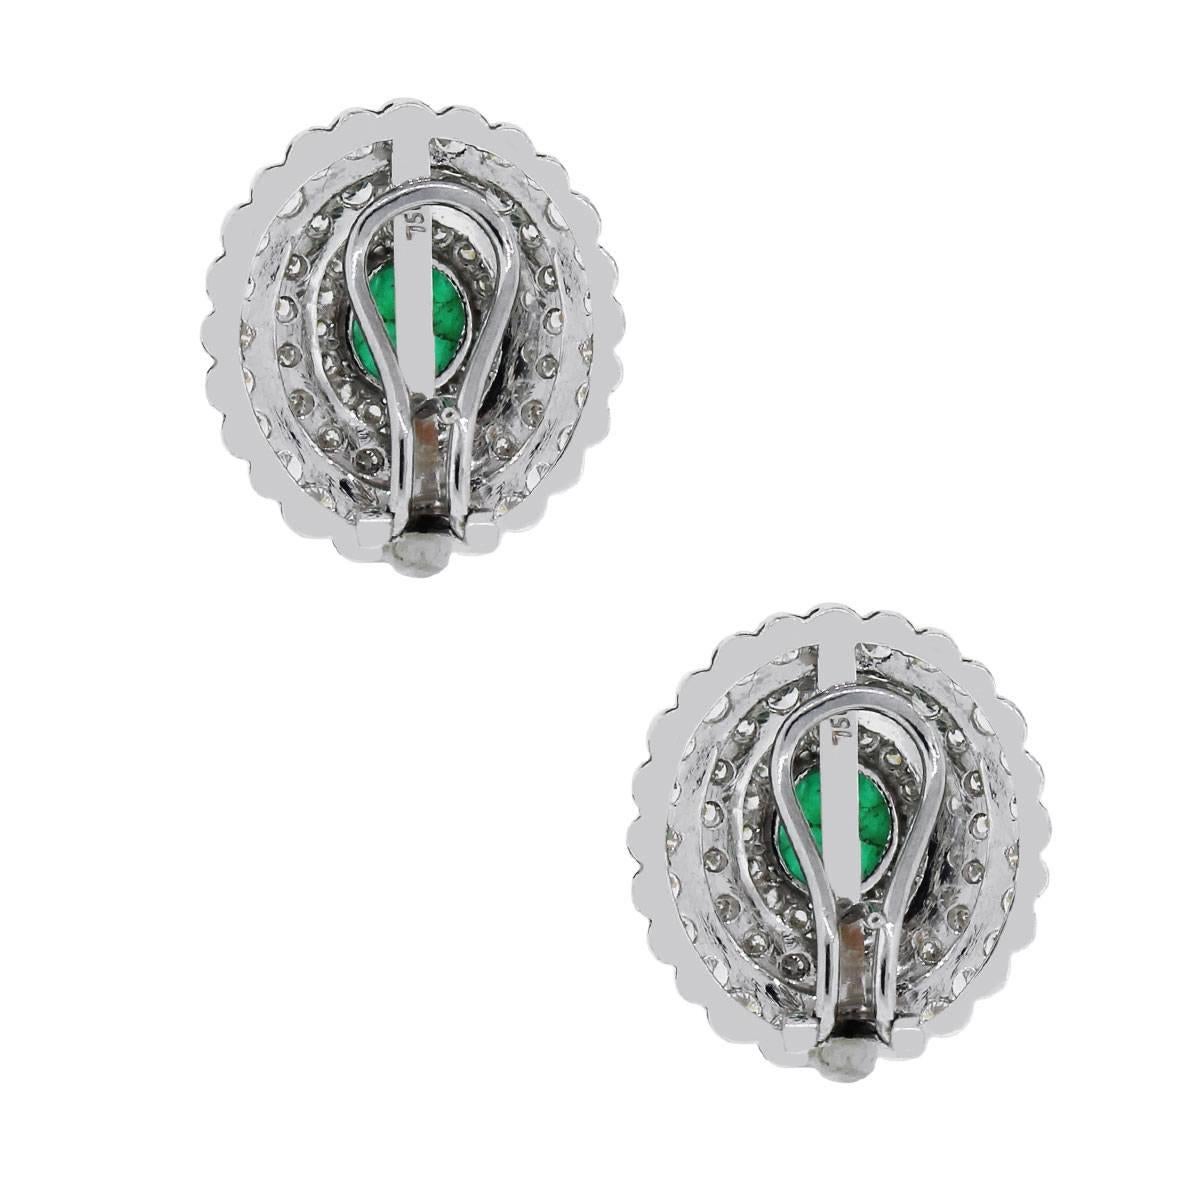 Material: 18k white gold
Diamond Details: Approximately 3.70ctw round brilliant cut diamonds. Diamonds are G/H in color and VS in clarity.
Gemstone Details: Approximately 3.25ctw cabochon emeralds.
Earring backs: Omega backs
Measurements: 0.90″ x